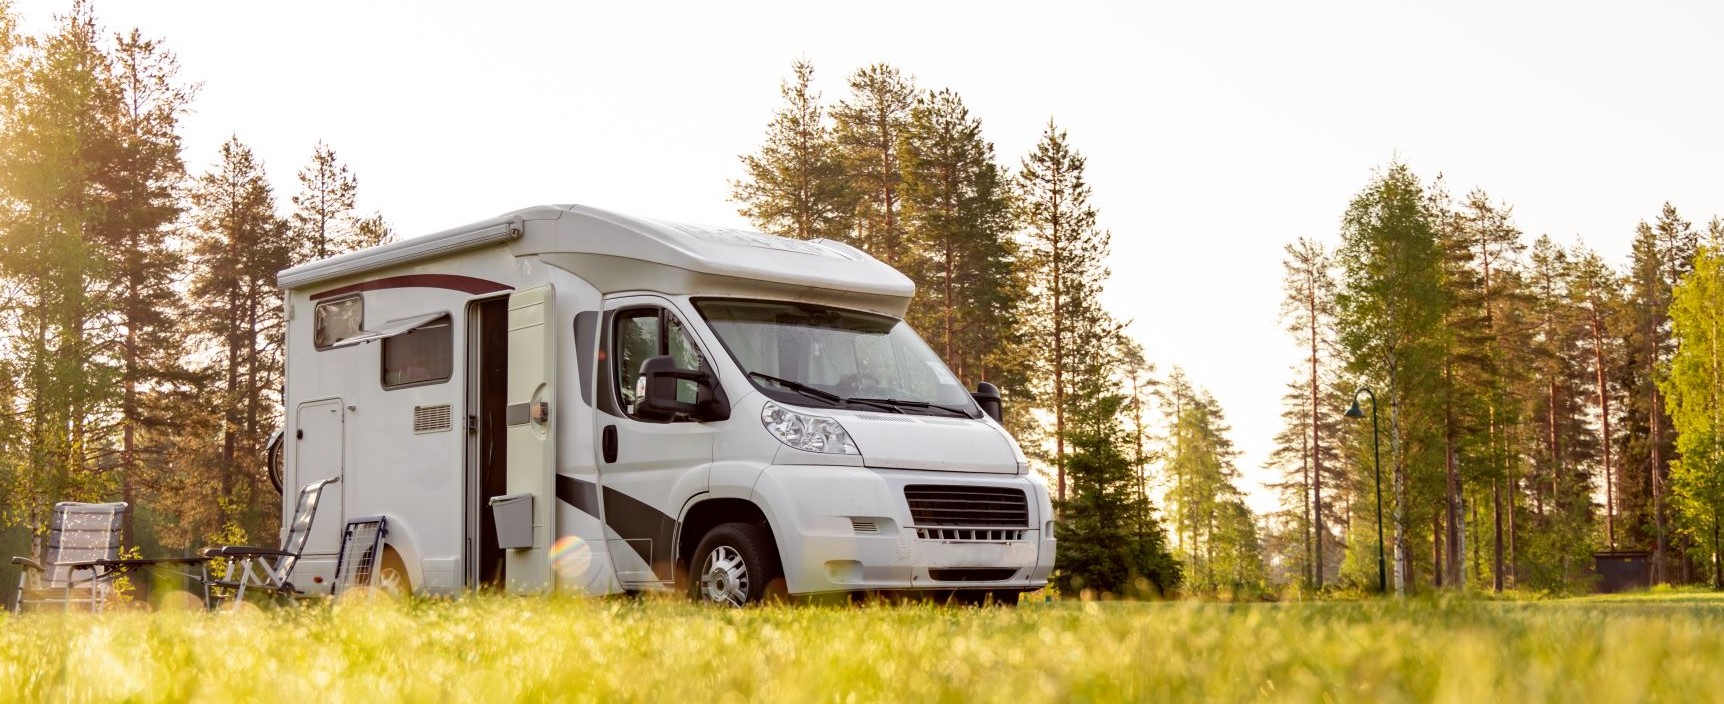 Motorhome parked on a grassy field in golden sunlight with trees behind.